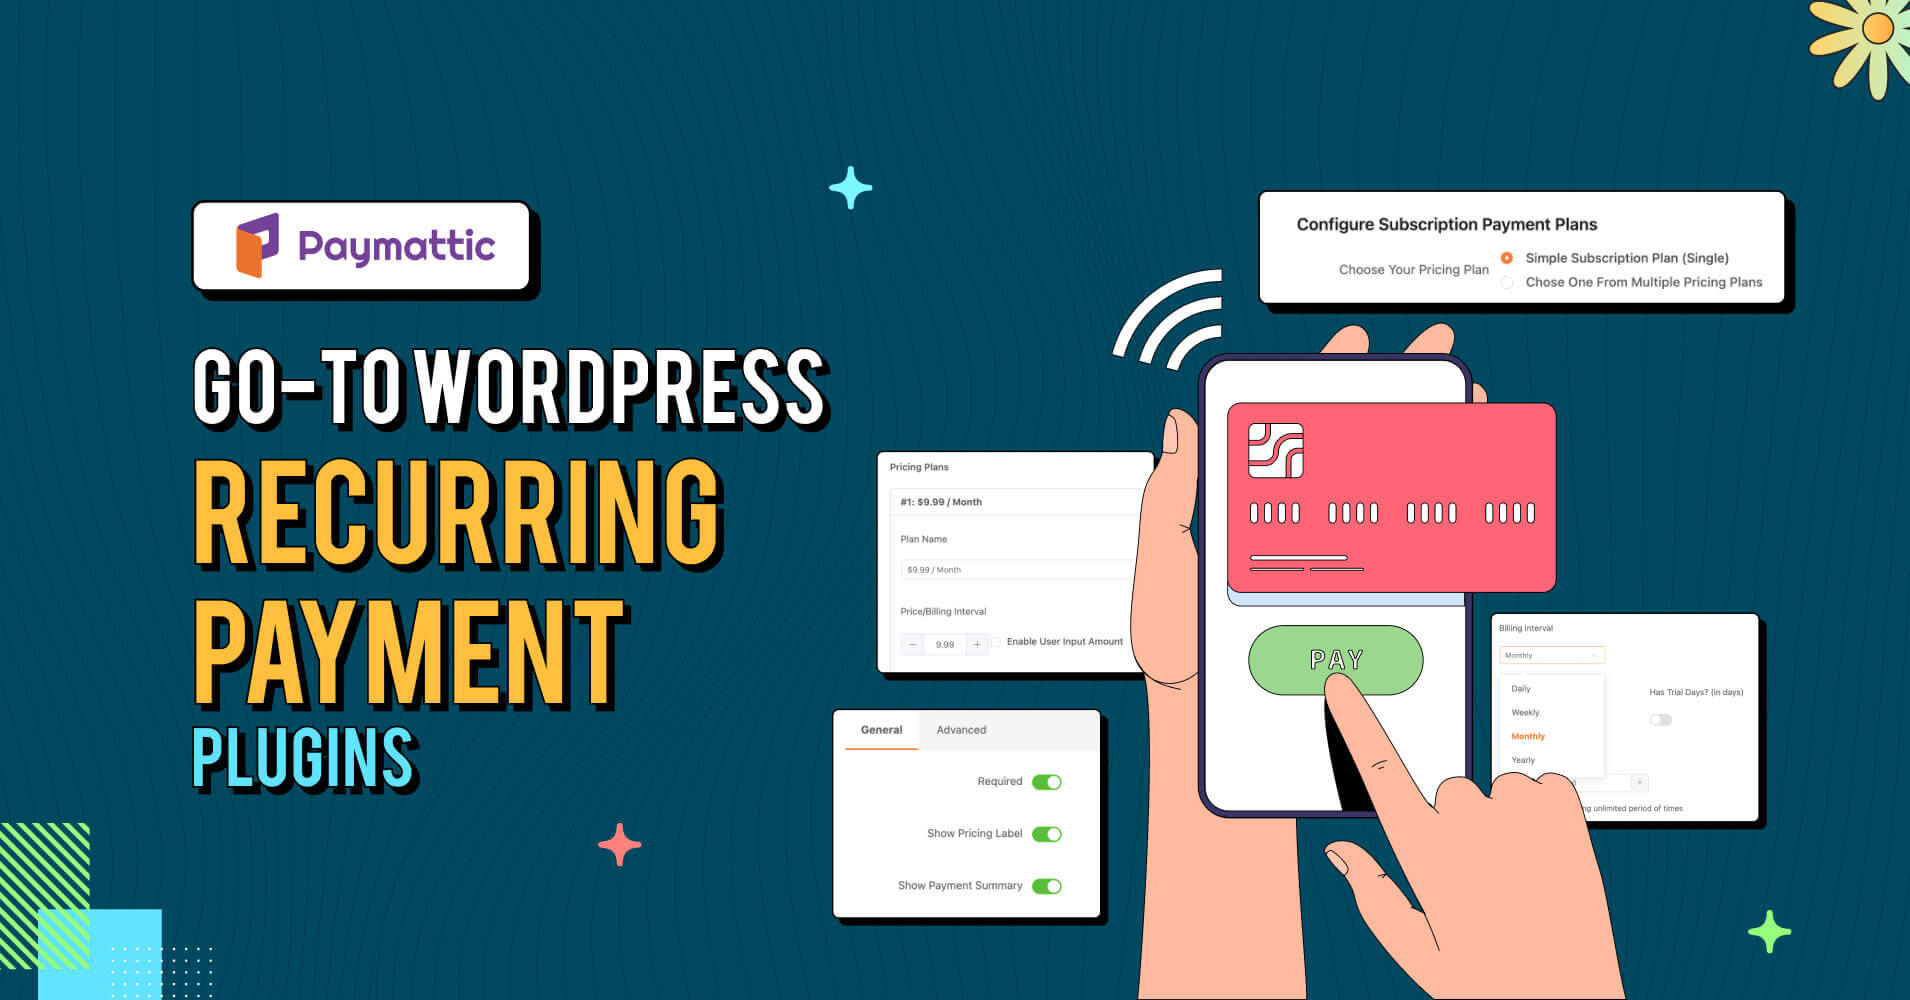 Go-To WordPress Recurring Payment Plugins